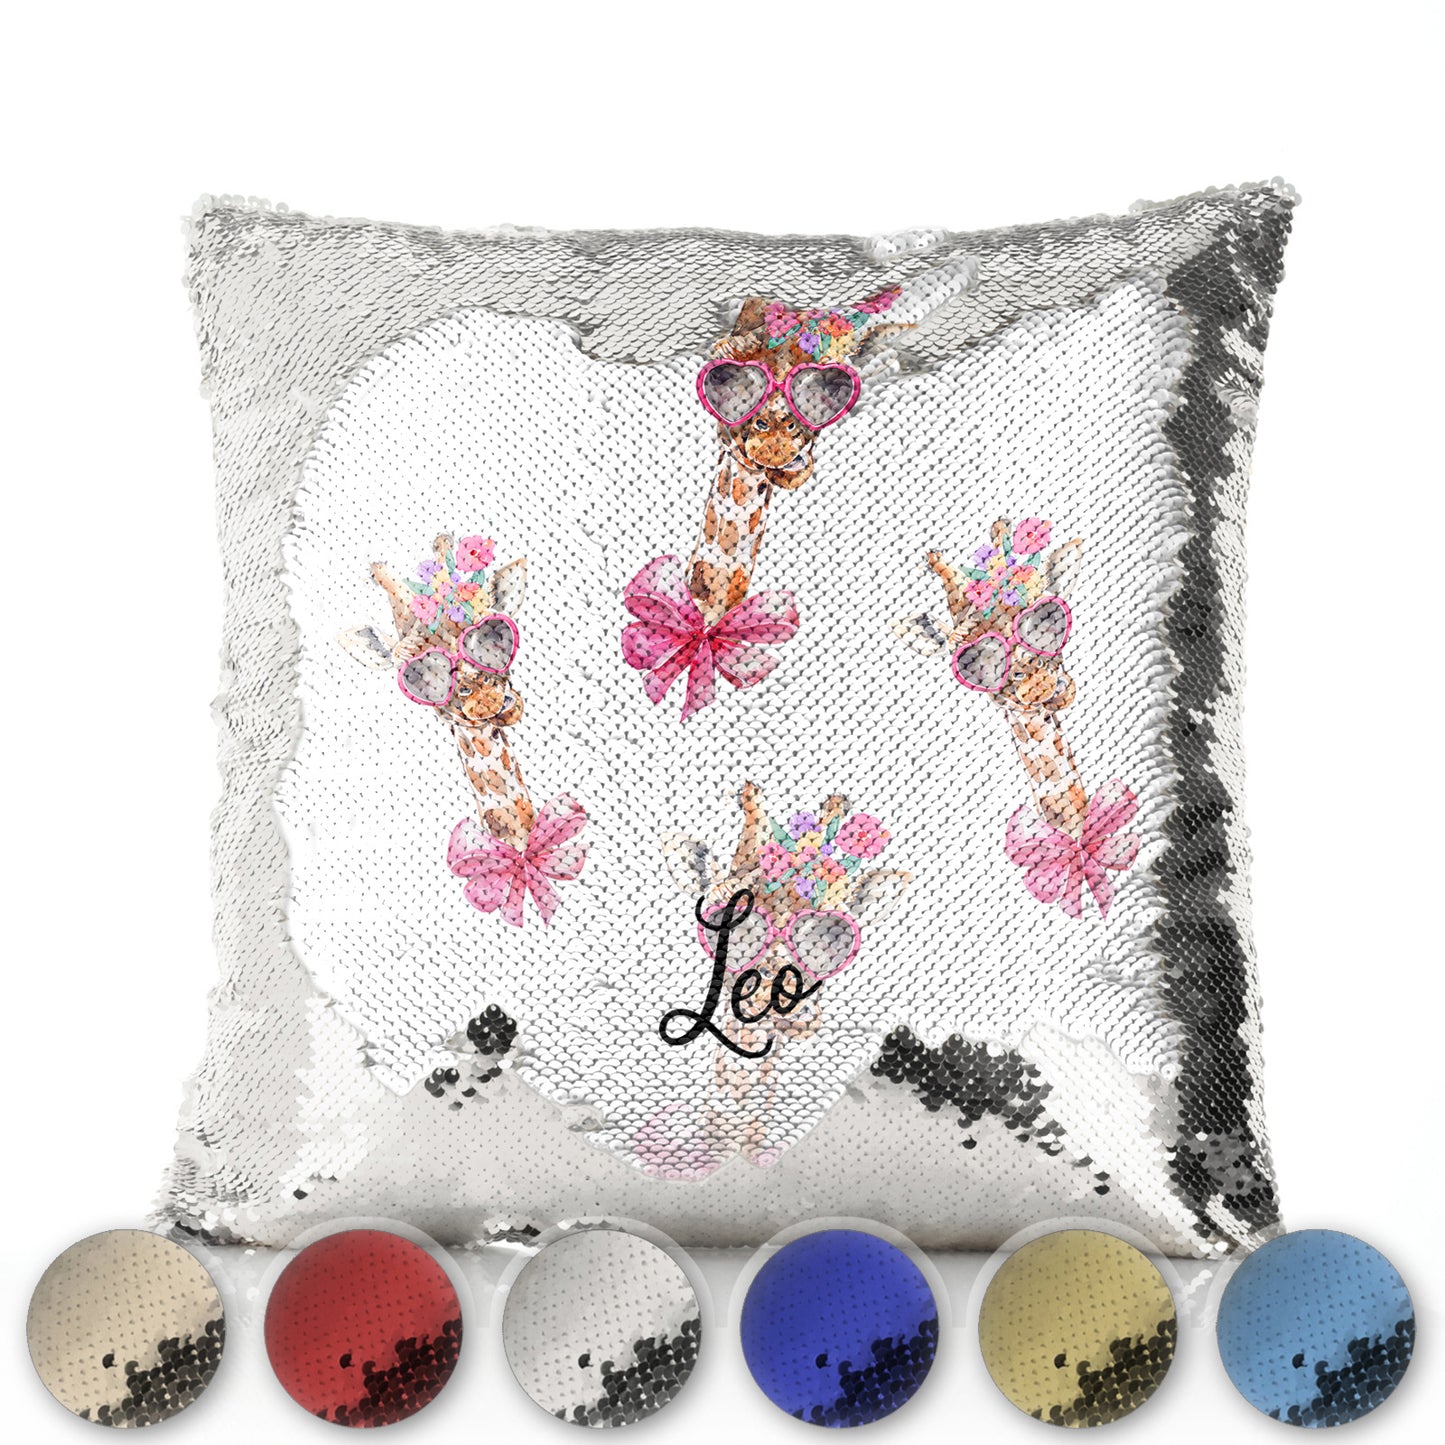 Personalised Sequin Cushion with Giraffe Pink Bow Multicolour Flowers and Cute Text